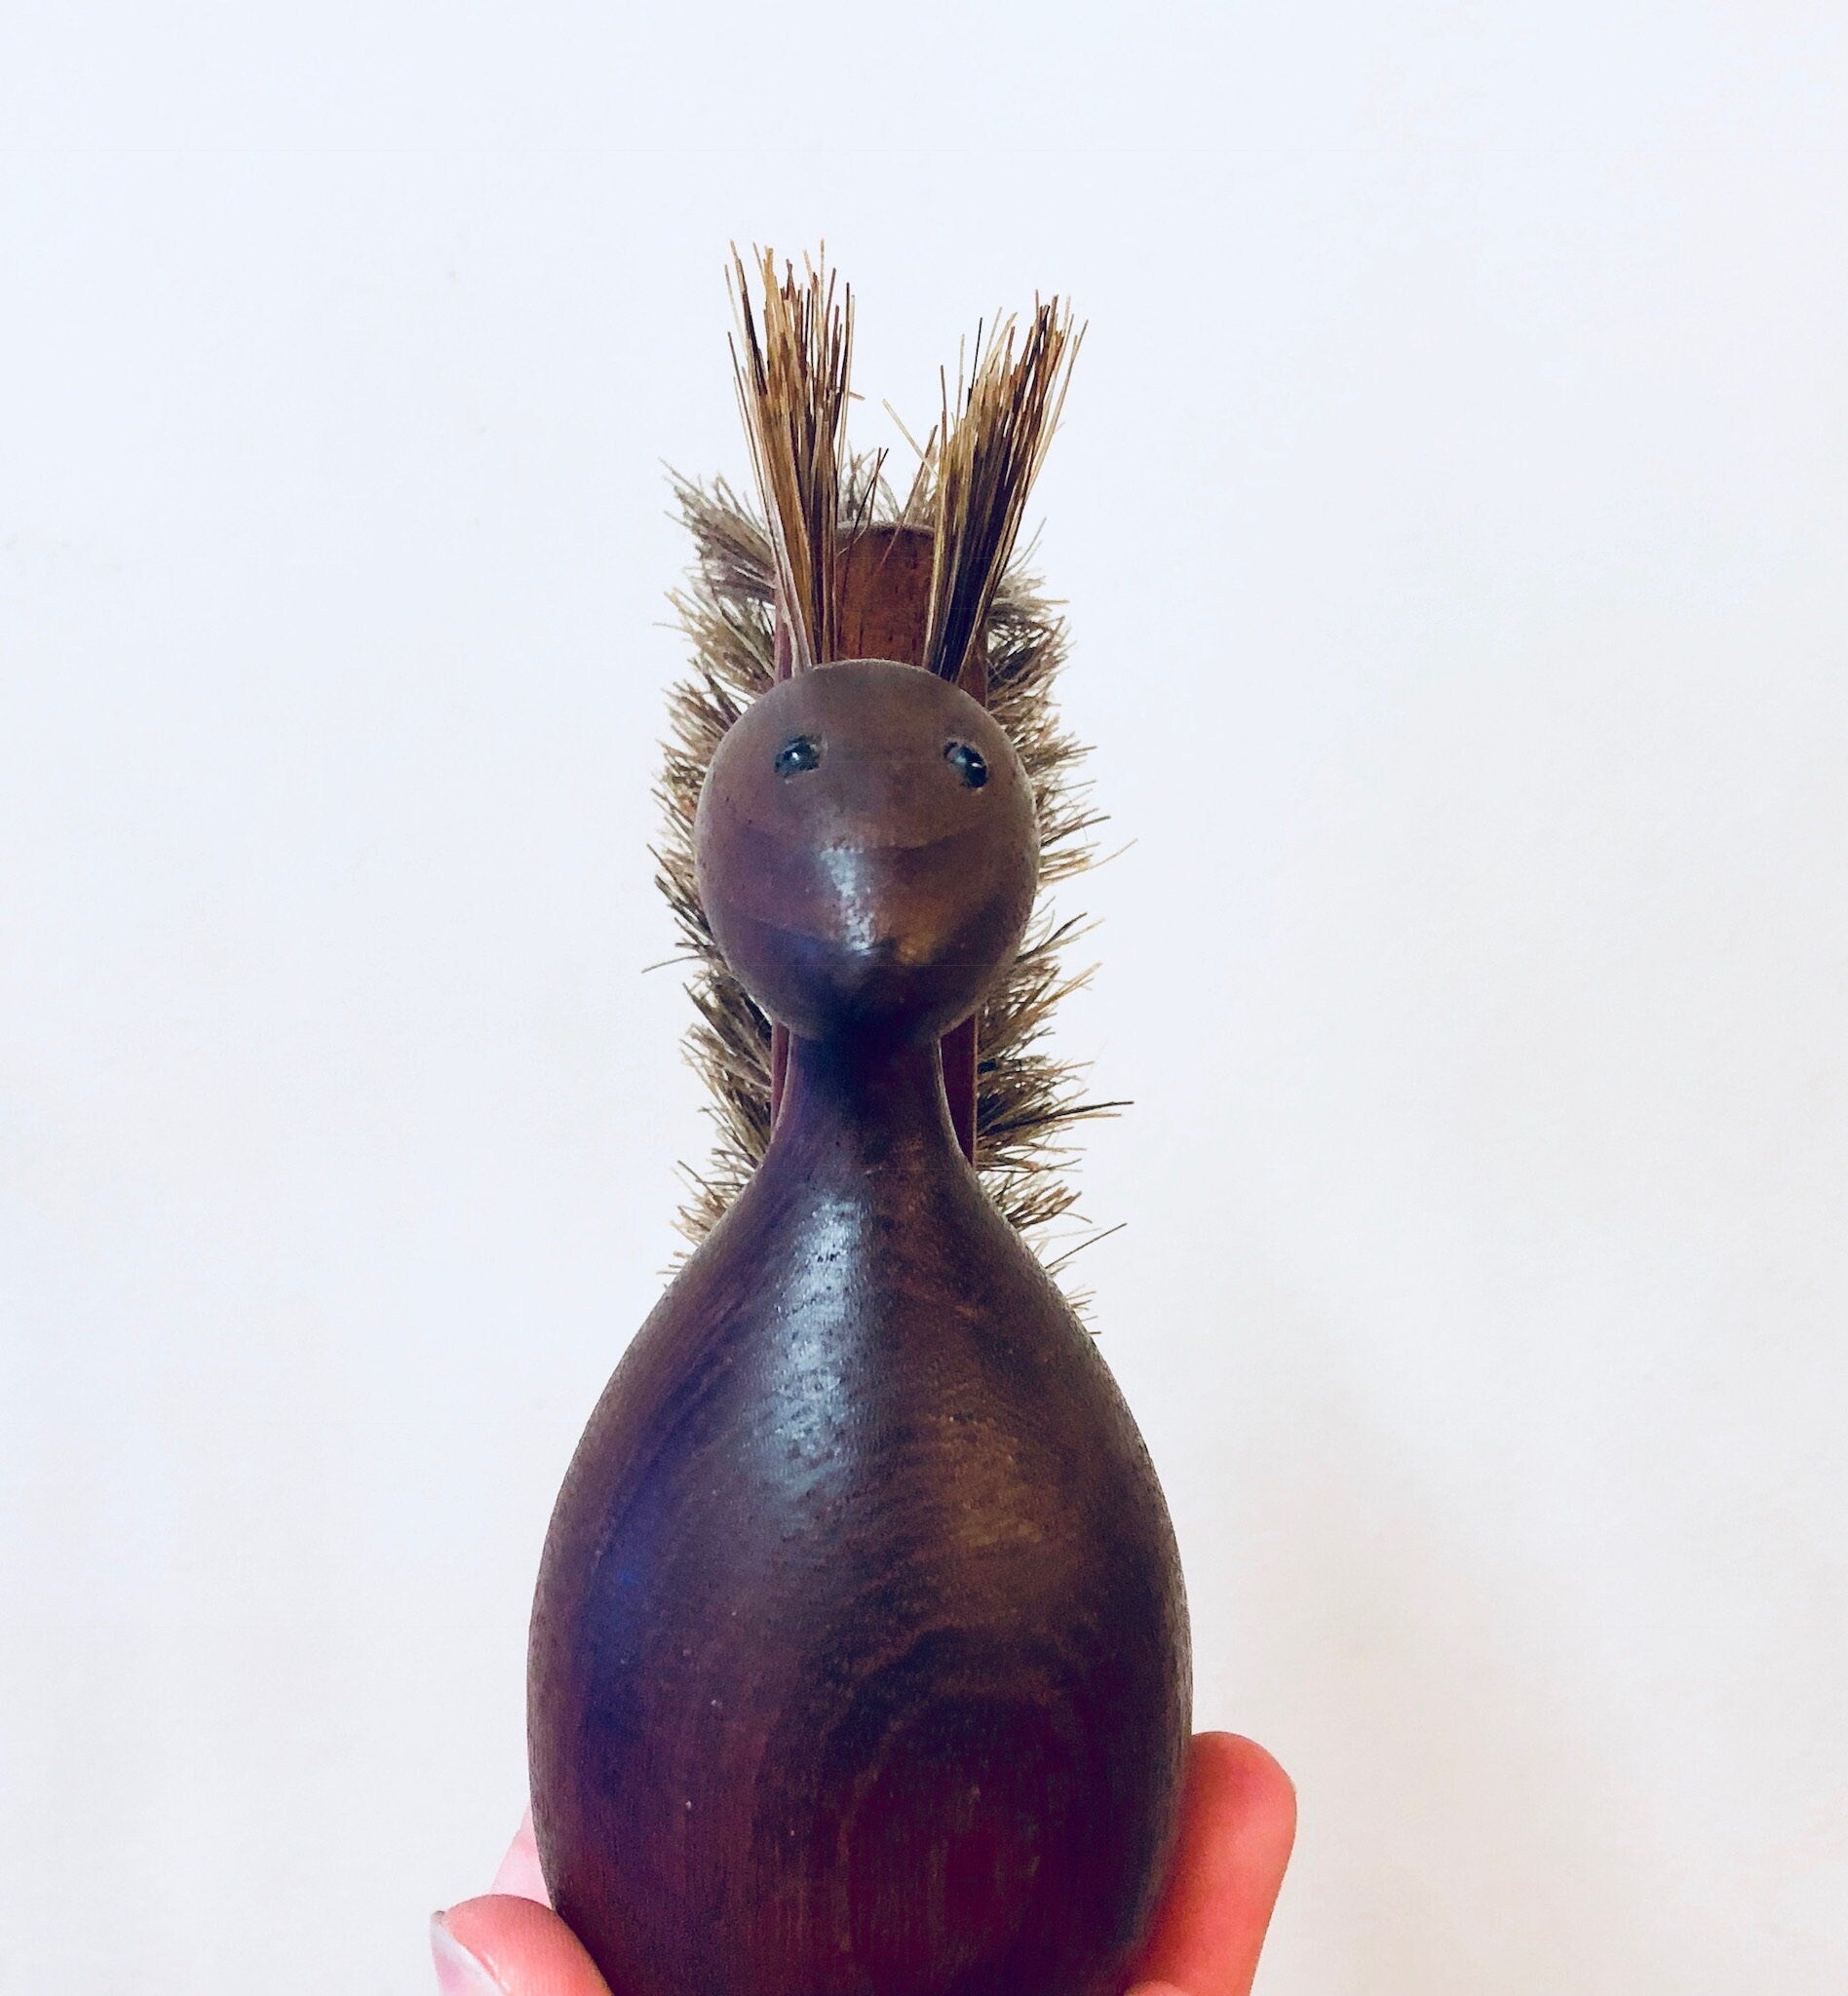 Vintage wooden squirrel-shaped scrub brush with bristle hair and carved details, held in hand against white background, rustic home decor accent in shades of brown and purple.